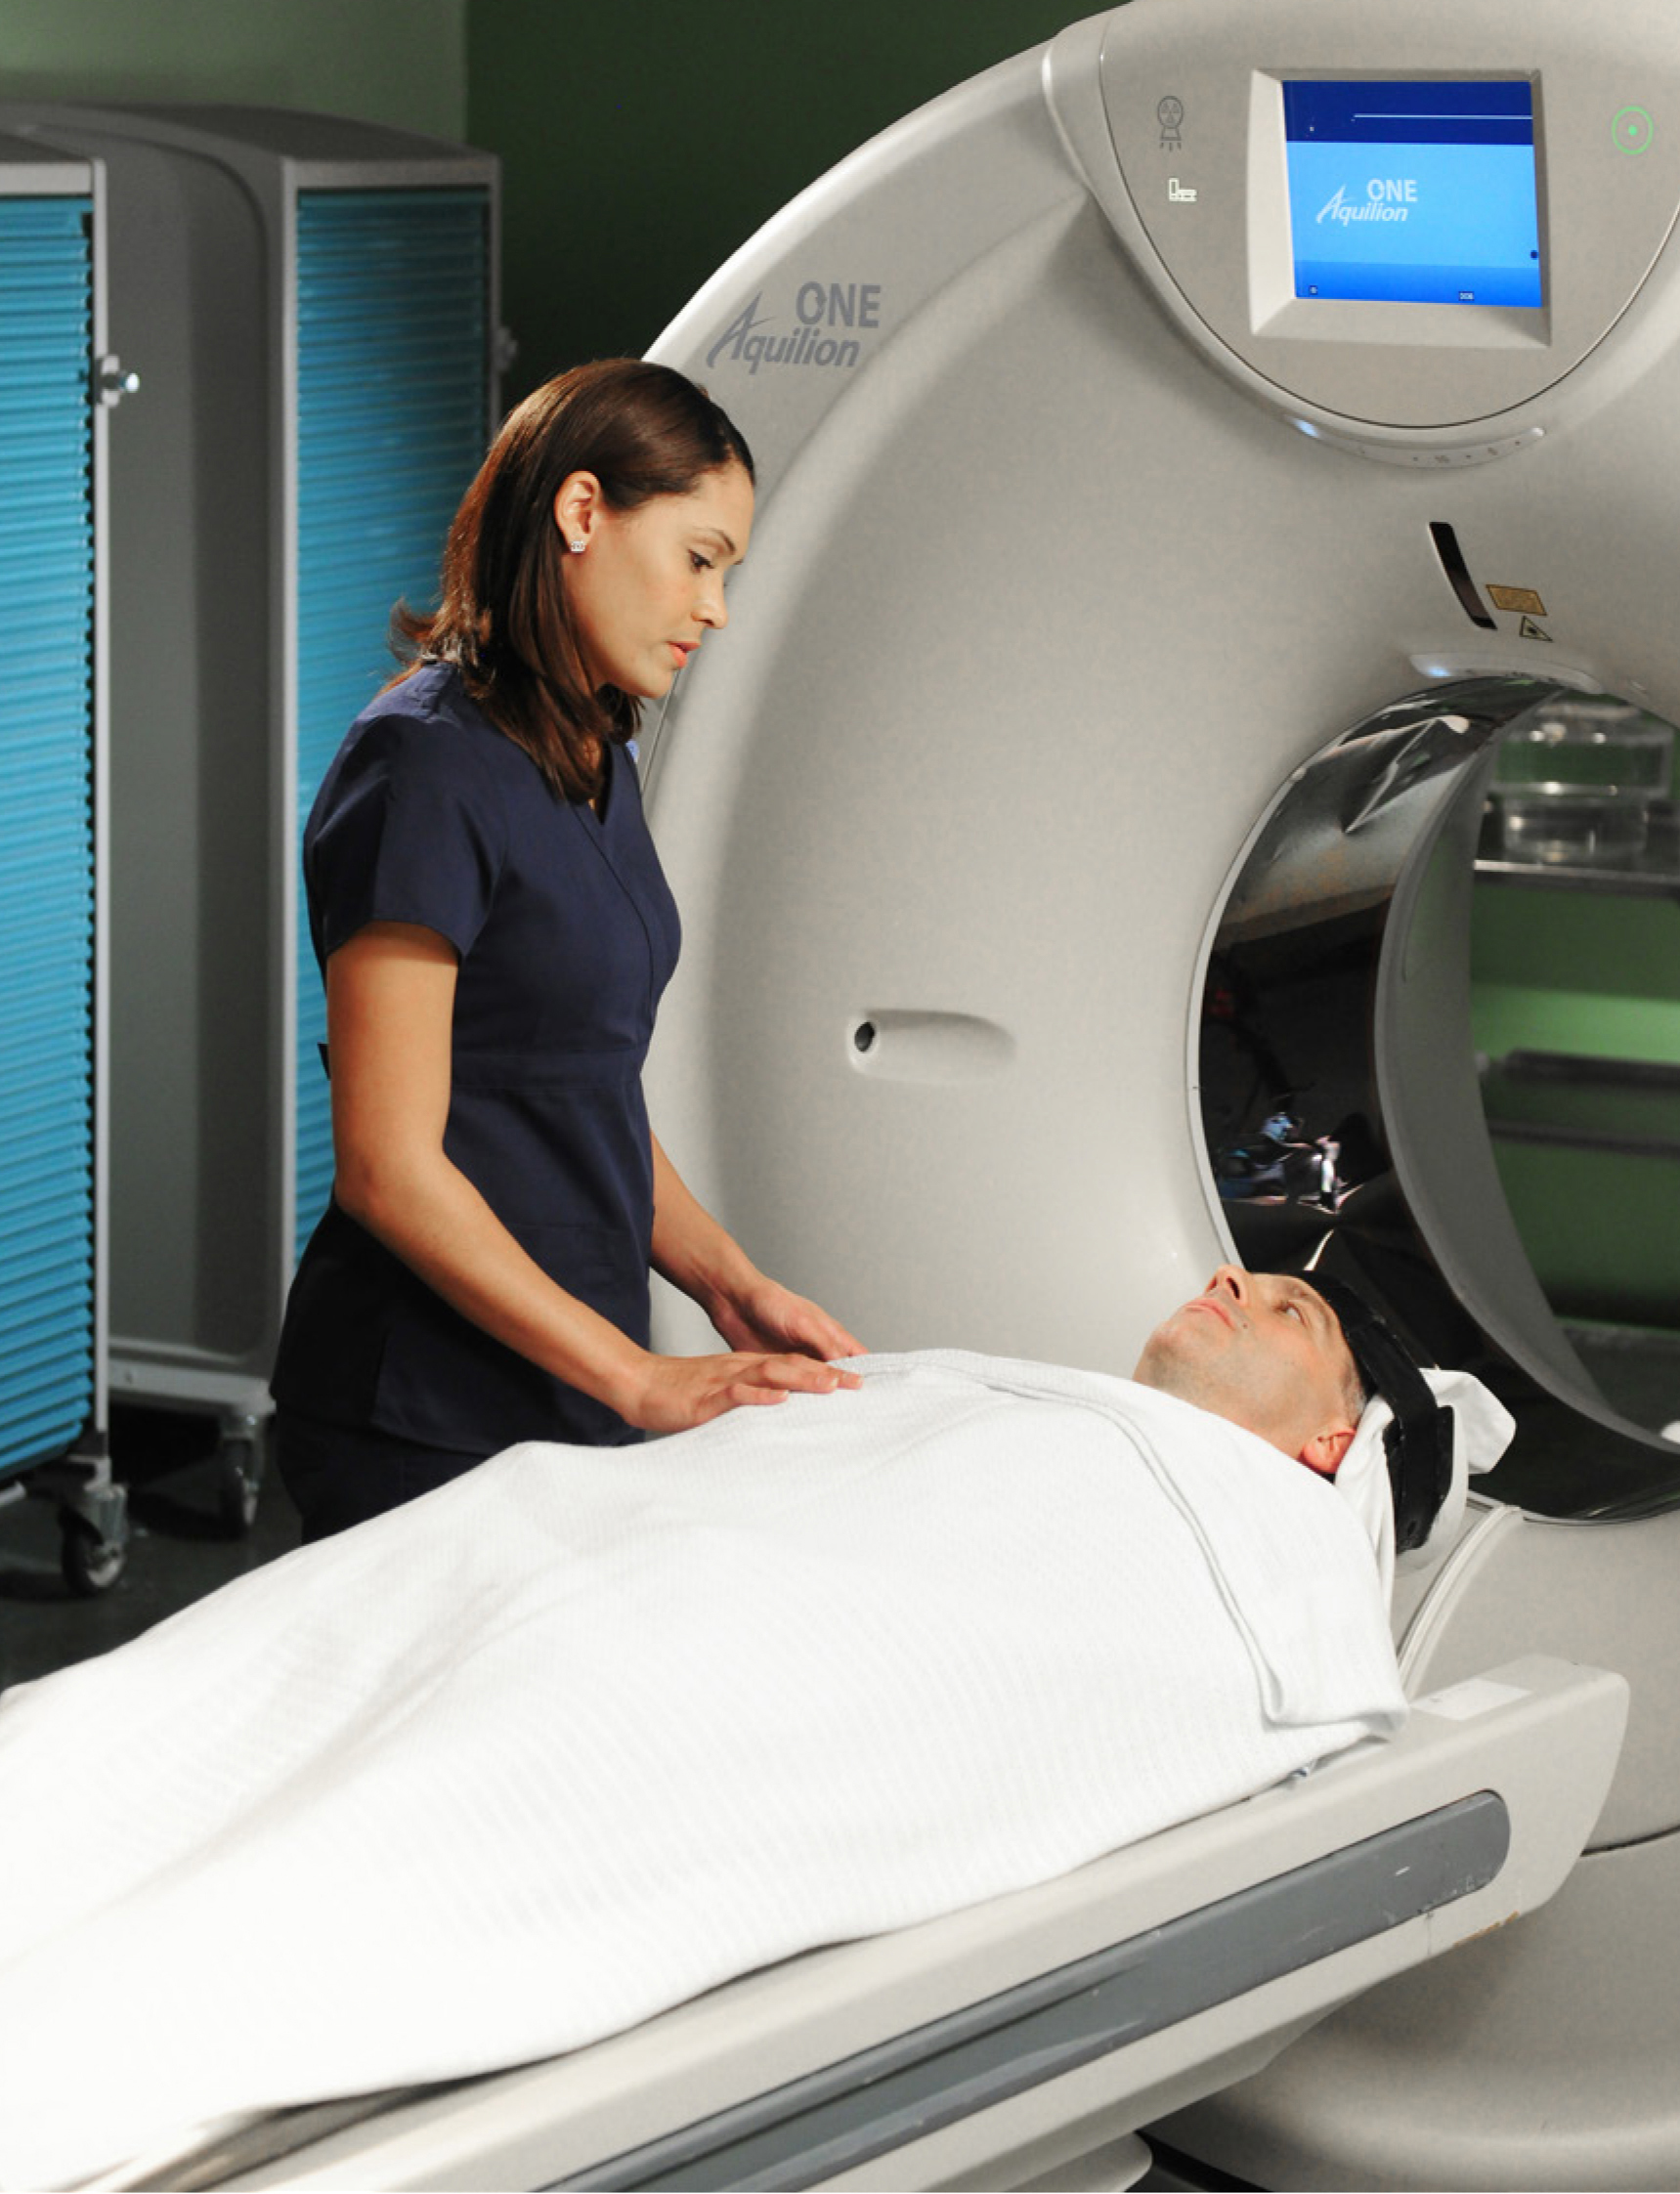 Aquilion ONE GENESIS CT Scanner Experience